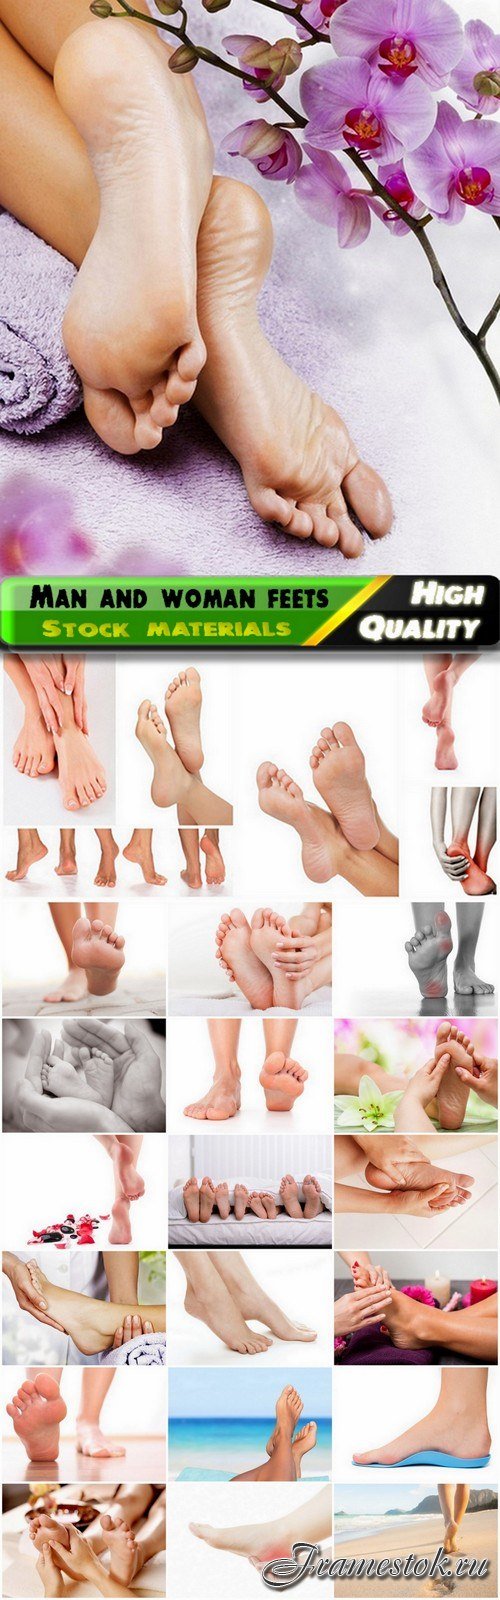 Legs of man and woman and feet massage - 25 HQ Jpg